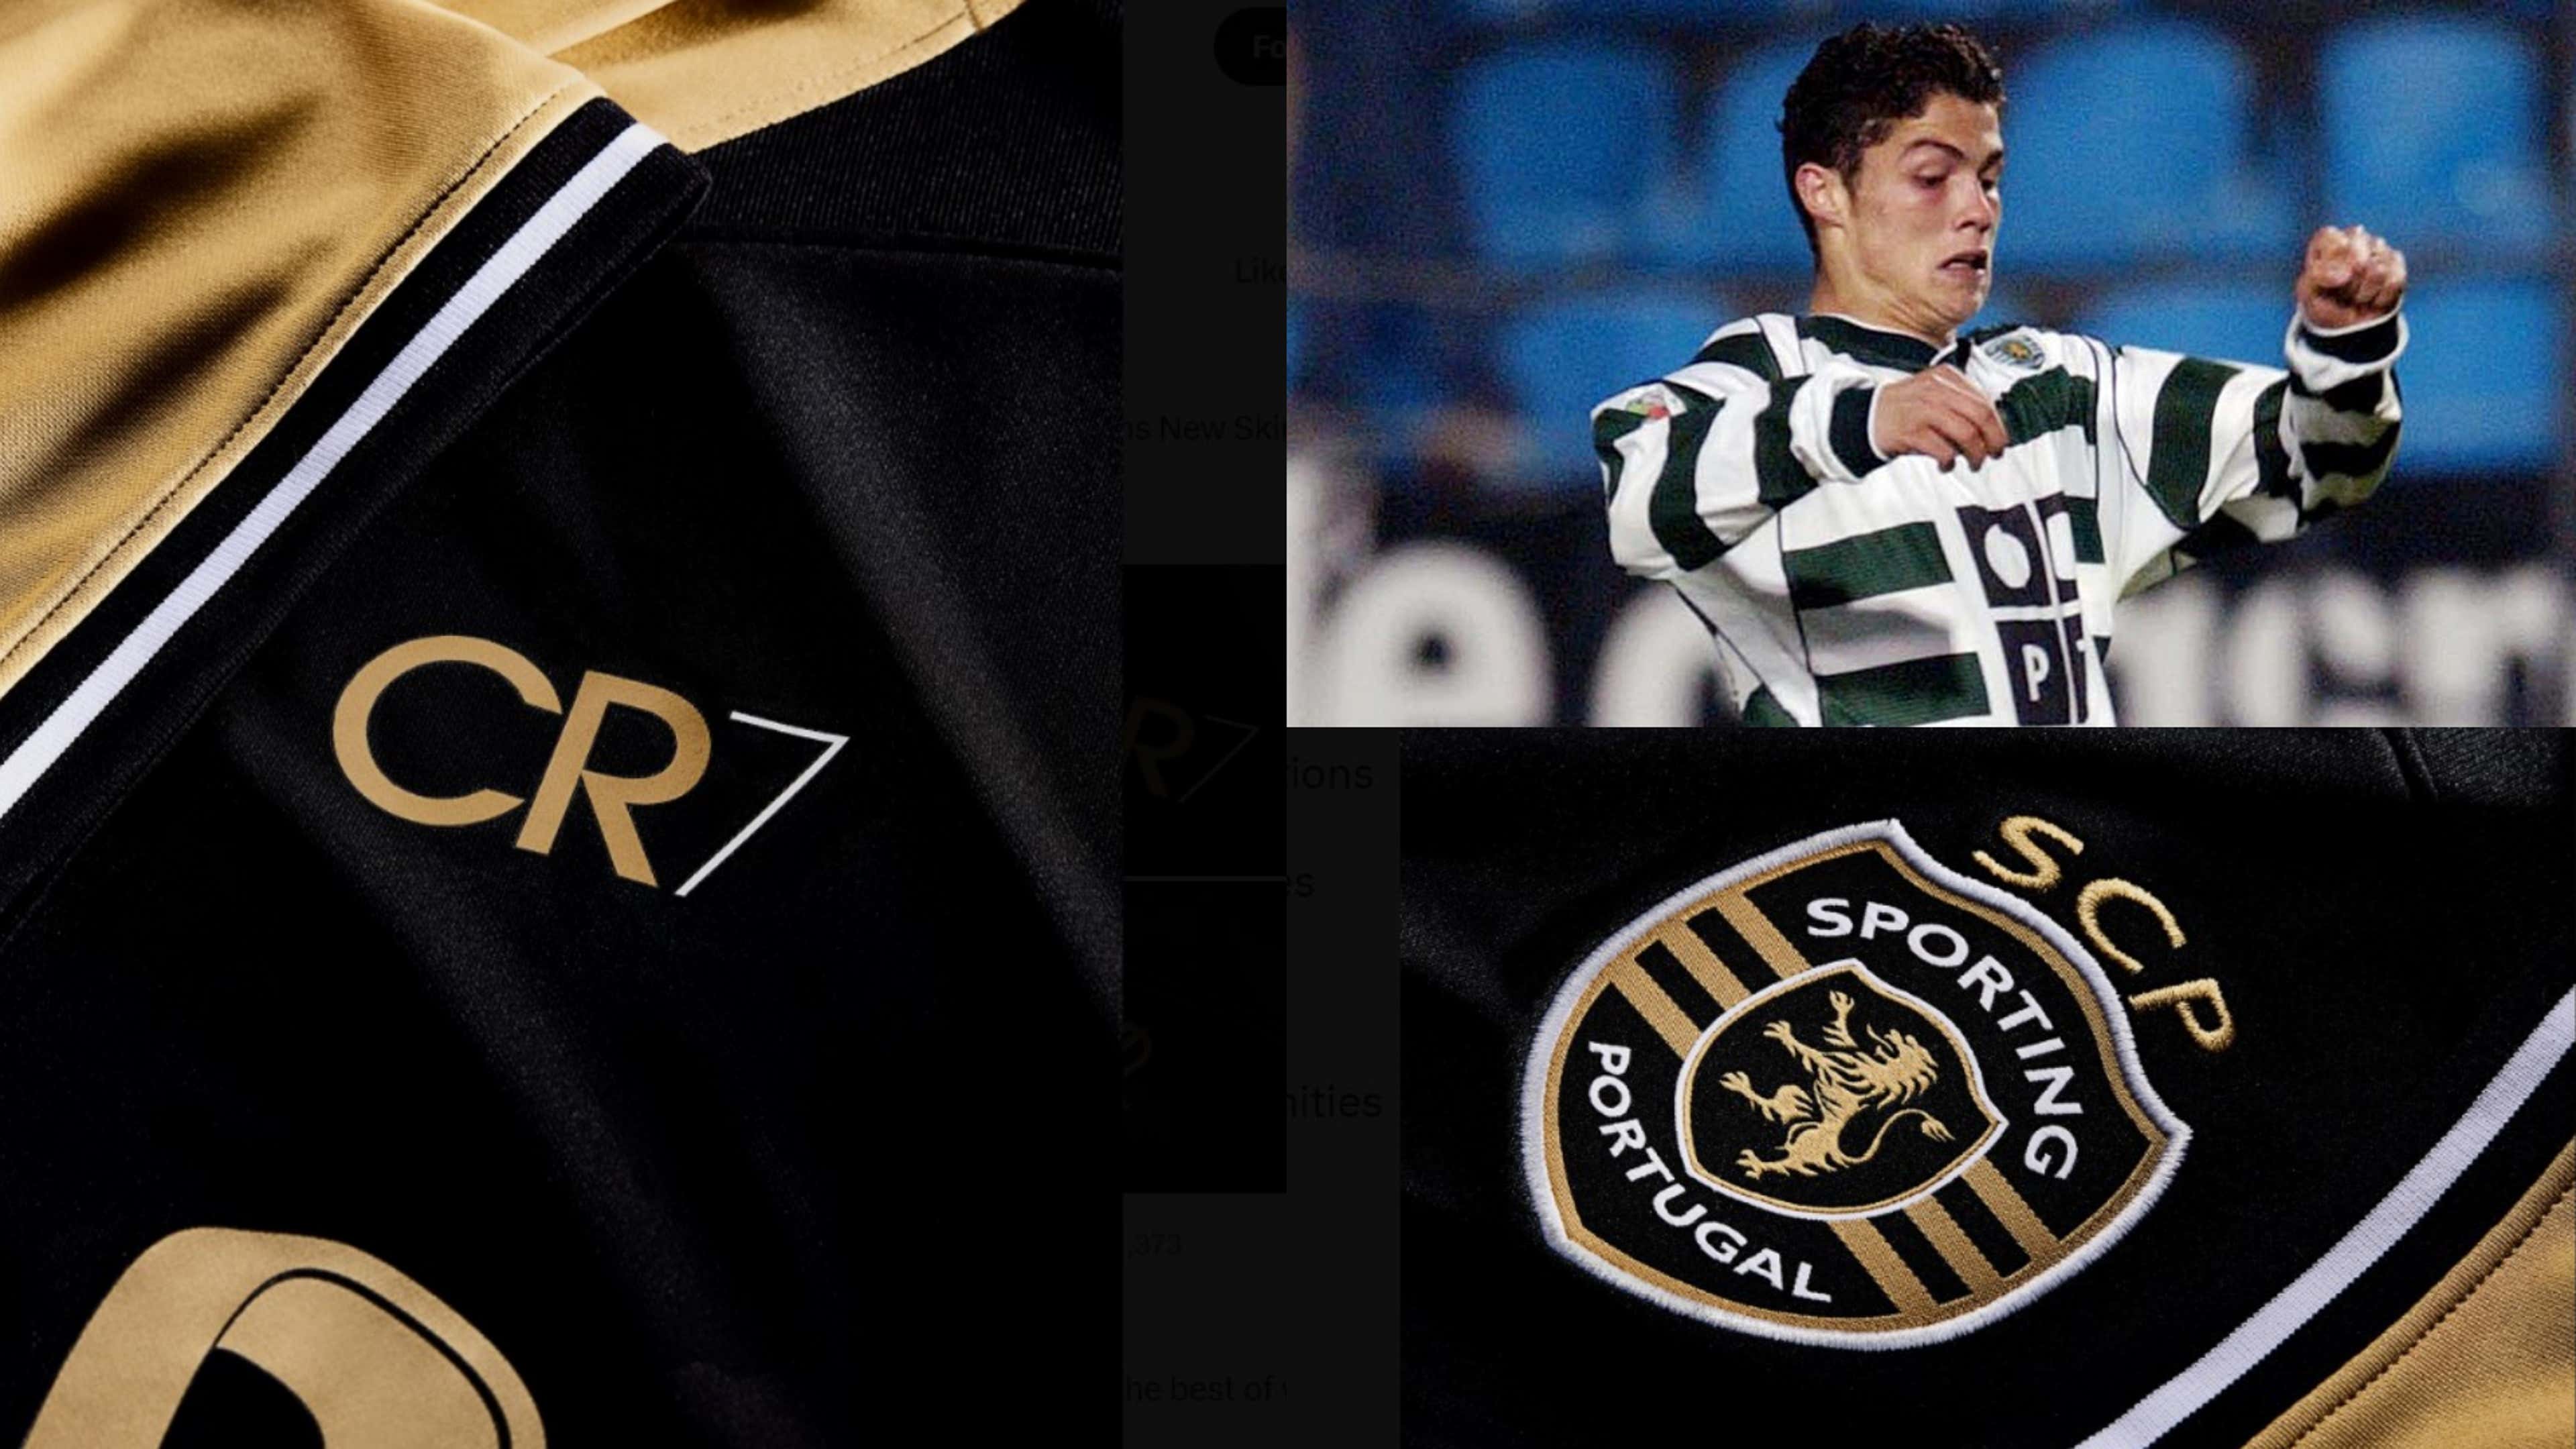 CR7 by Cristiano Ronaldo introduces new shirts